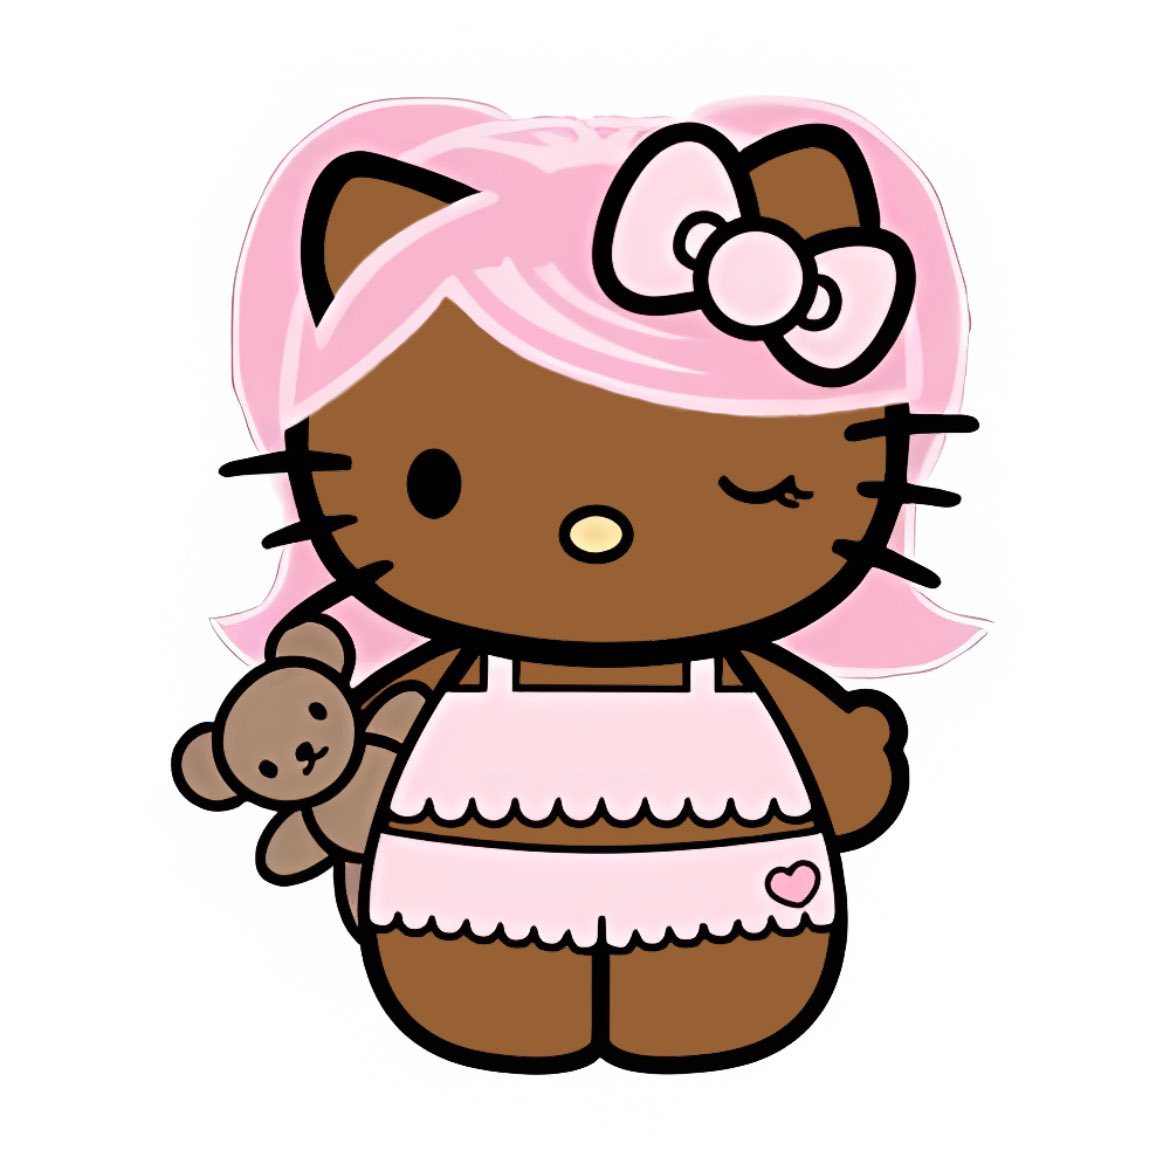 maya ꕤ saw this hello kitty on my tl and she instantly reminded me of so